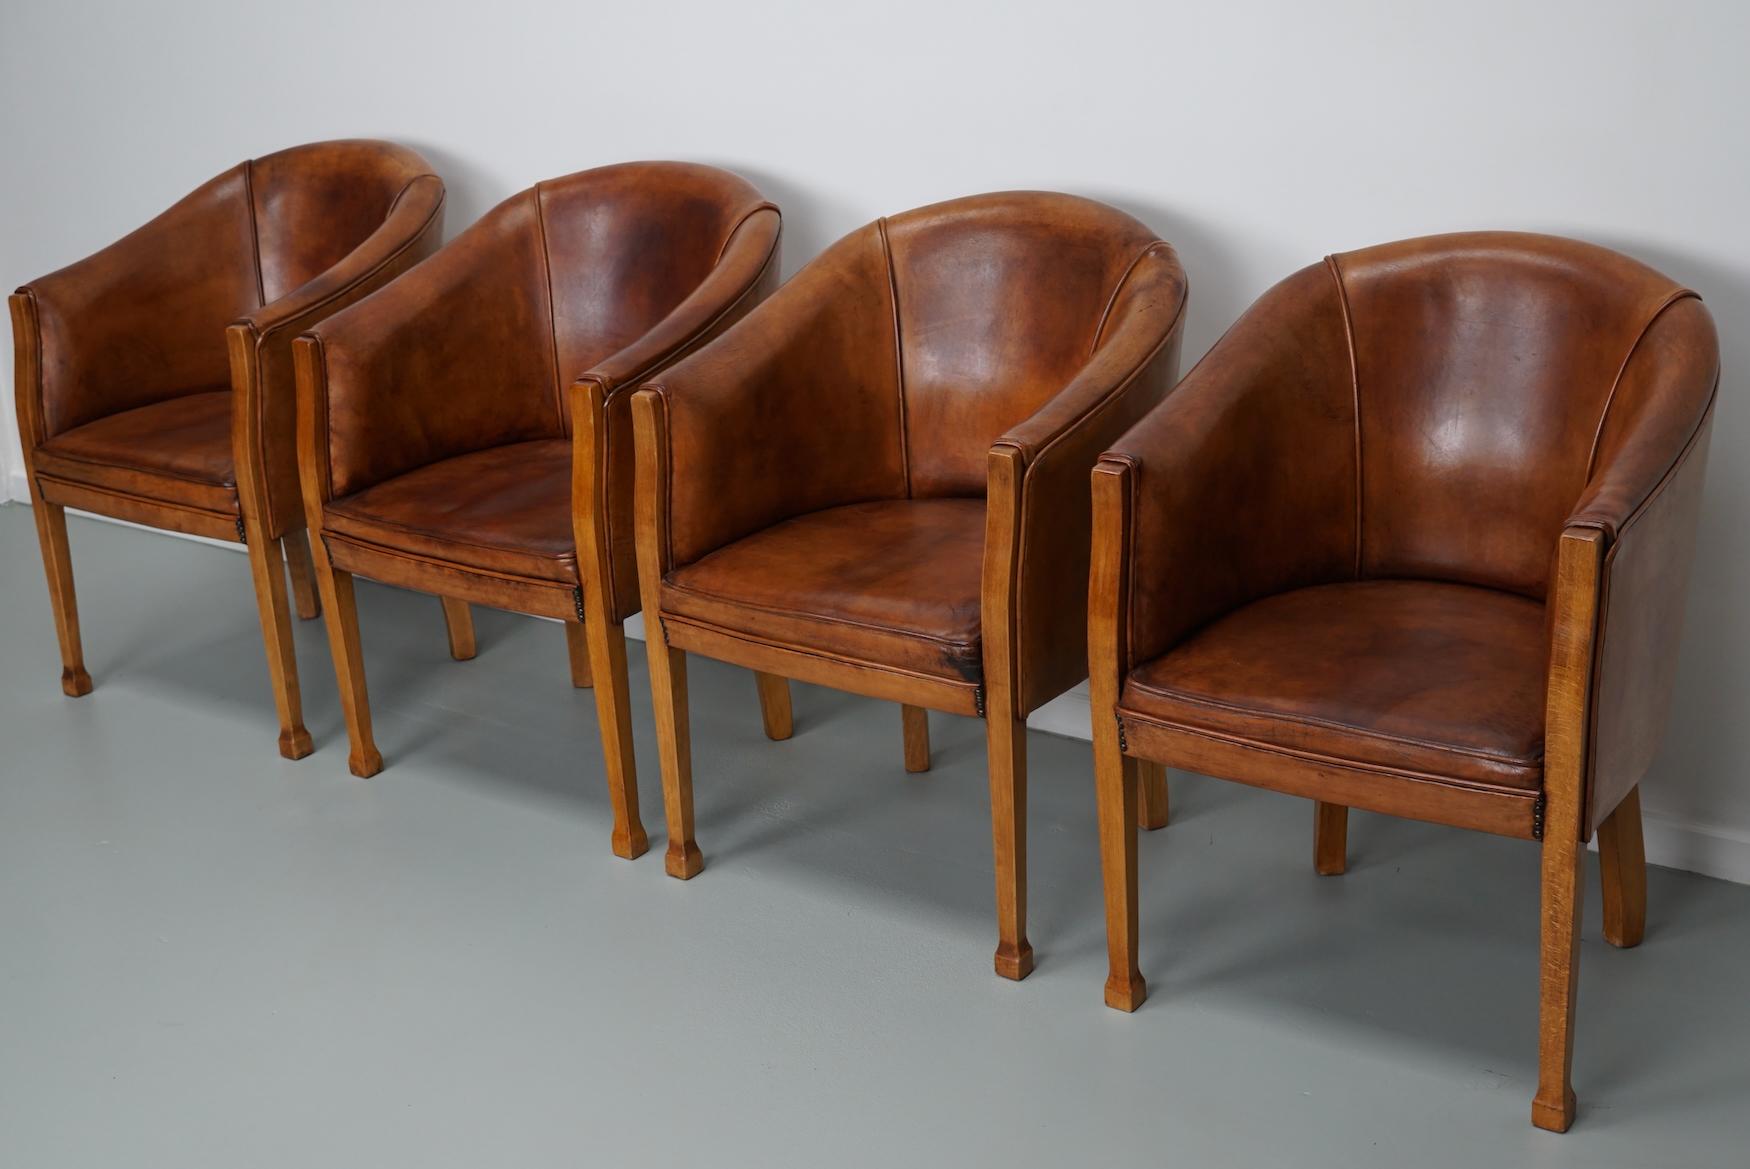 This set of four cognac-colored leather club chairs come from the Netherlands. They are upholstered with cognac-colored leather and feature metal rivets and wooden legs. 